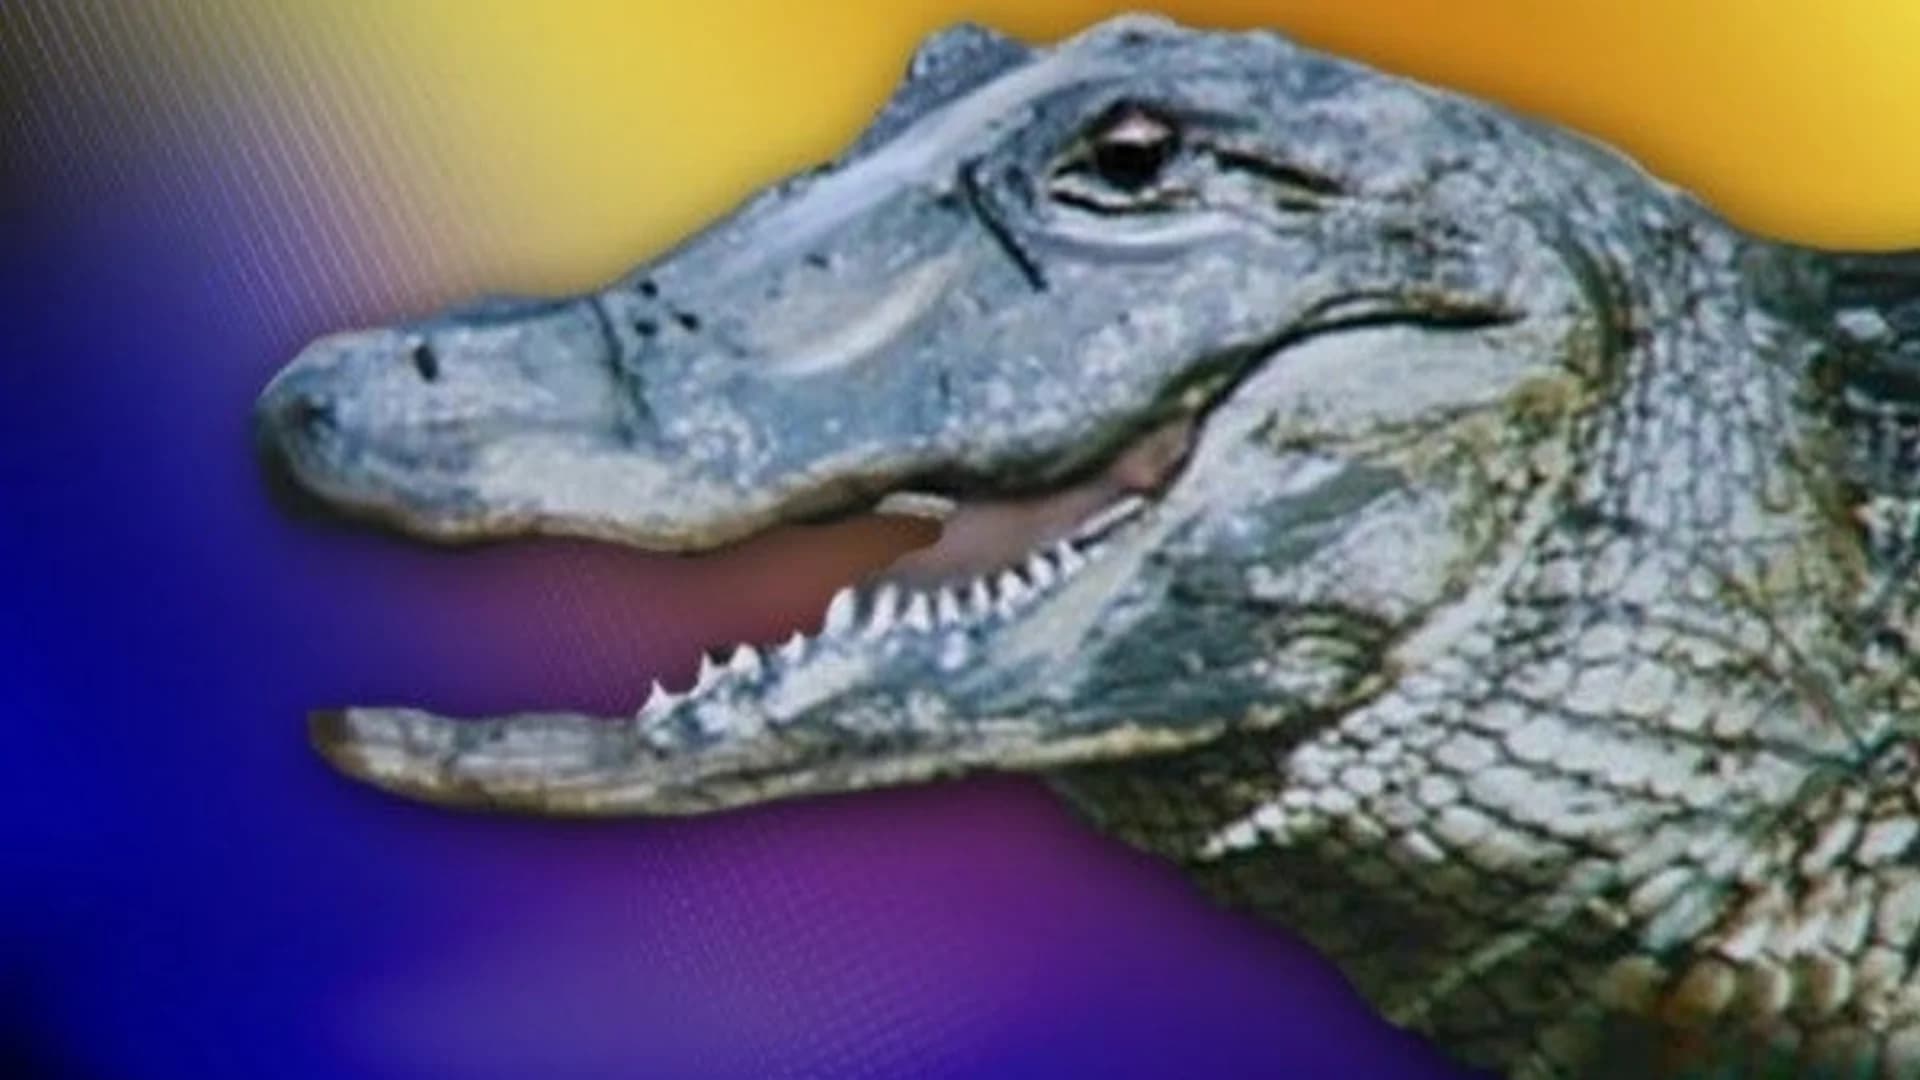 Police search for alligator on the loose in New Jersey